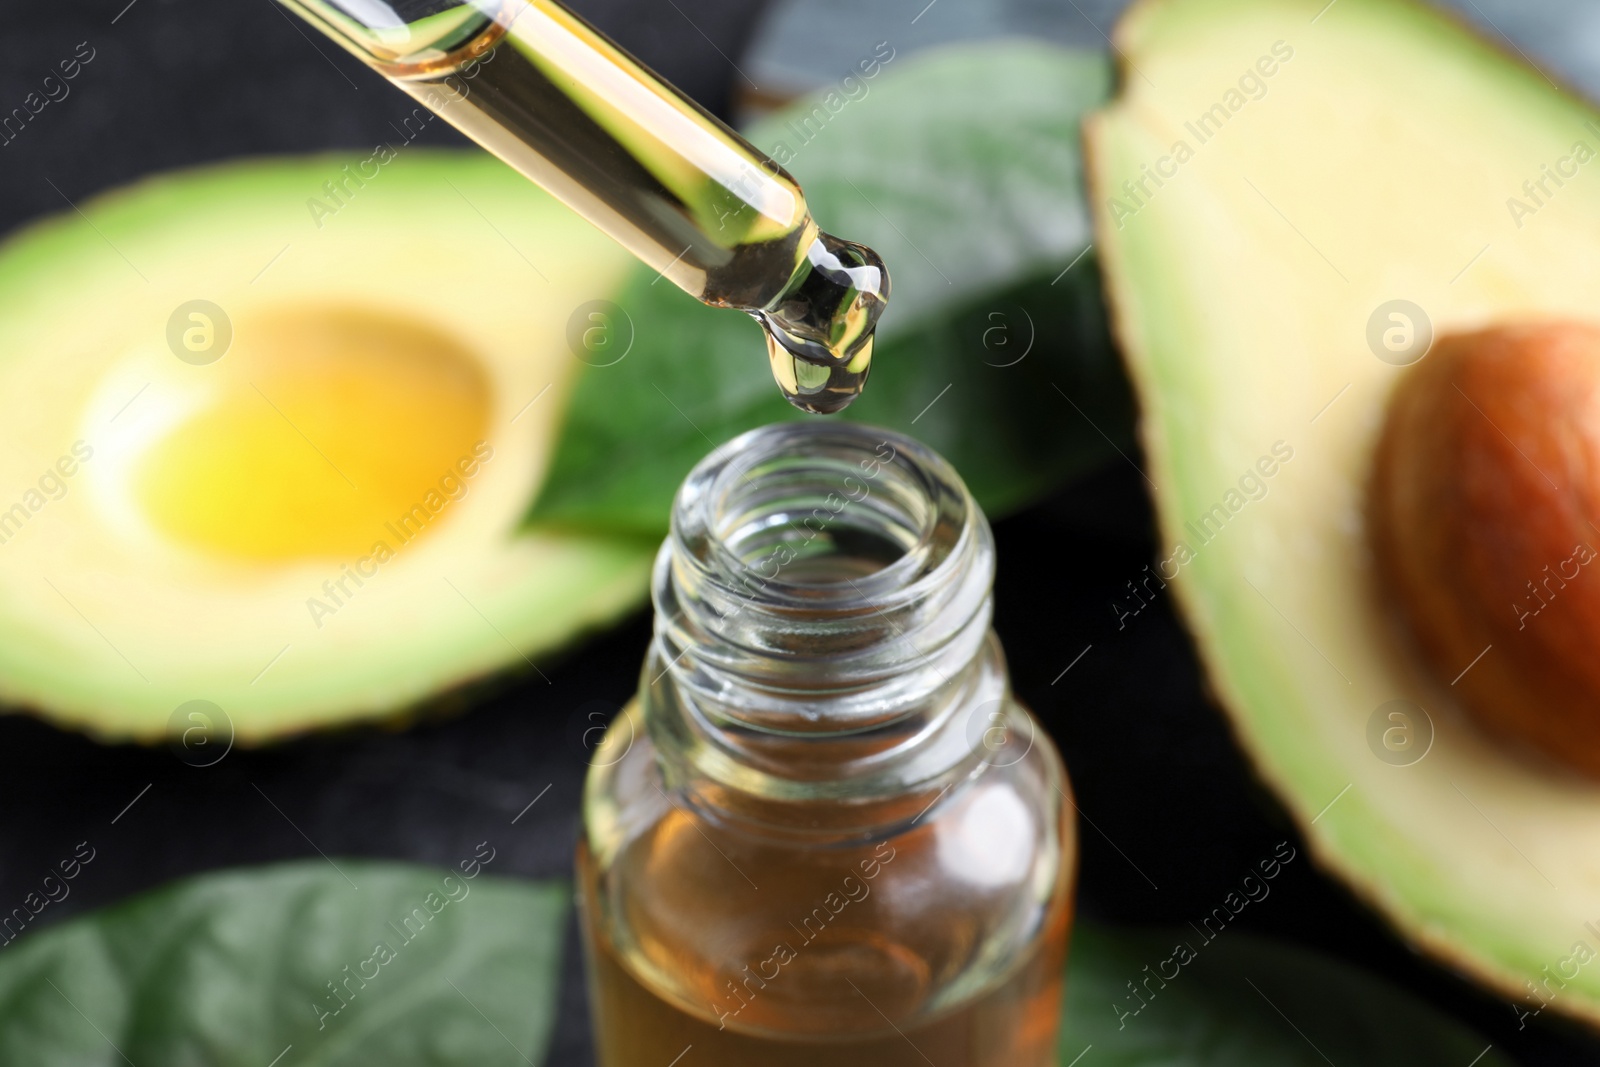 Photo of Dripping essential oil into bottle near cut avocado, closeup